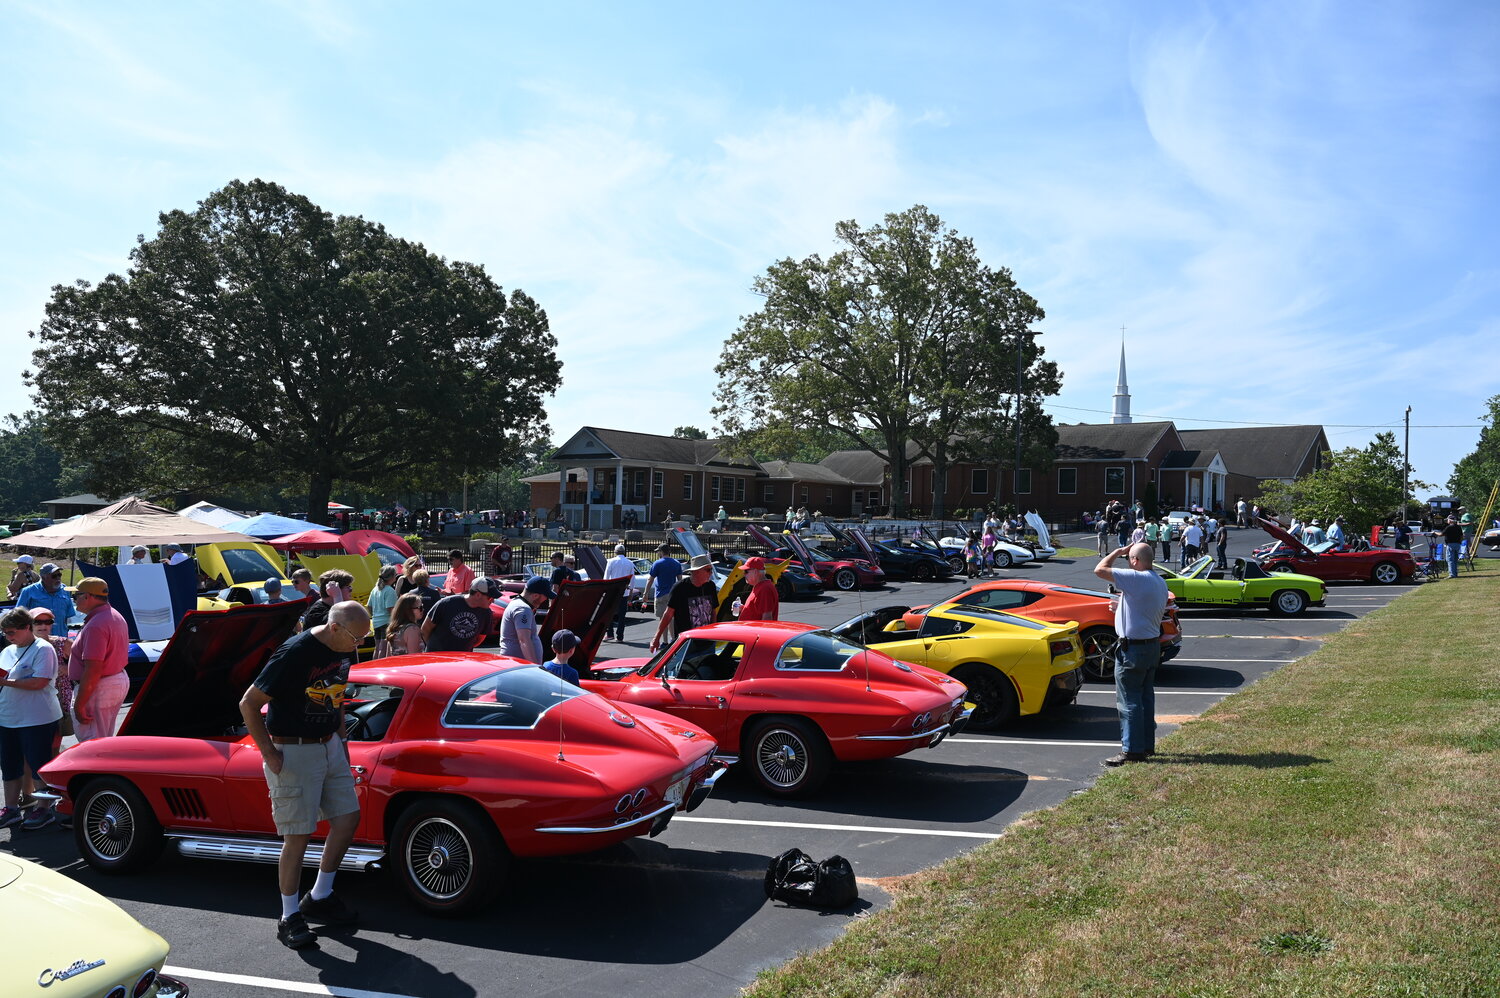 People stroll among cars on display at Flat Creek Baptist Church in Fayetteville on Saturday, June 3, 2023. (Index/Roger Alford).